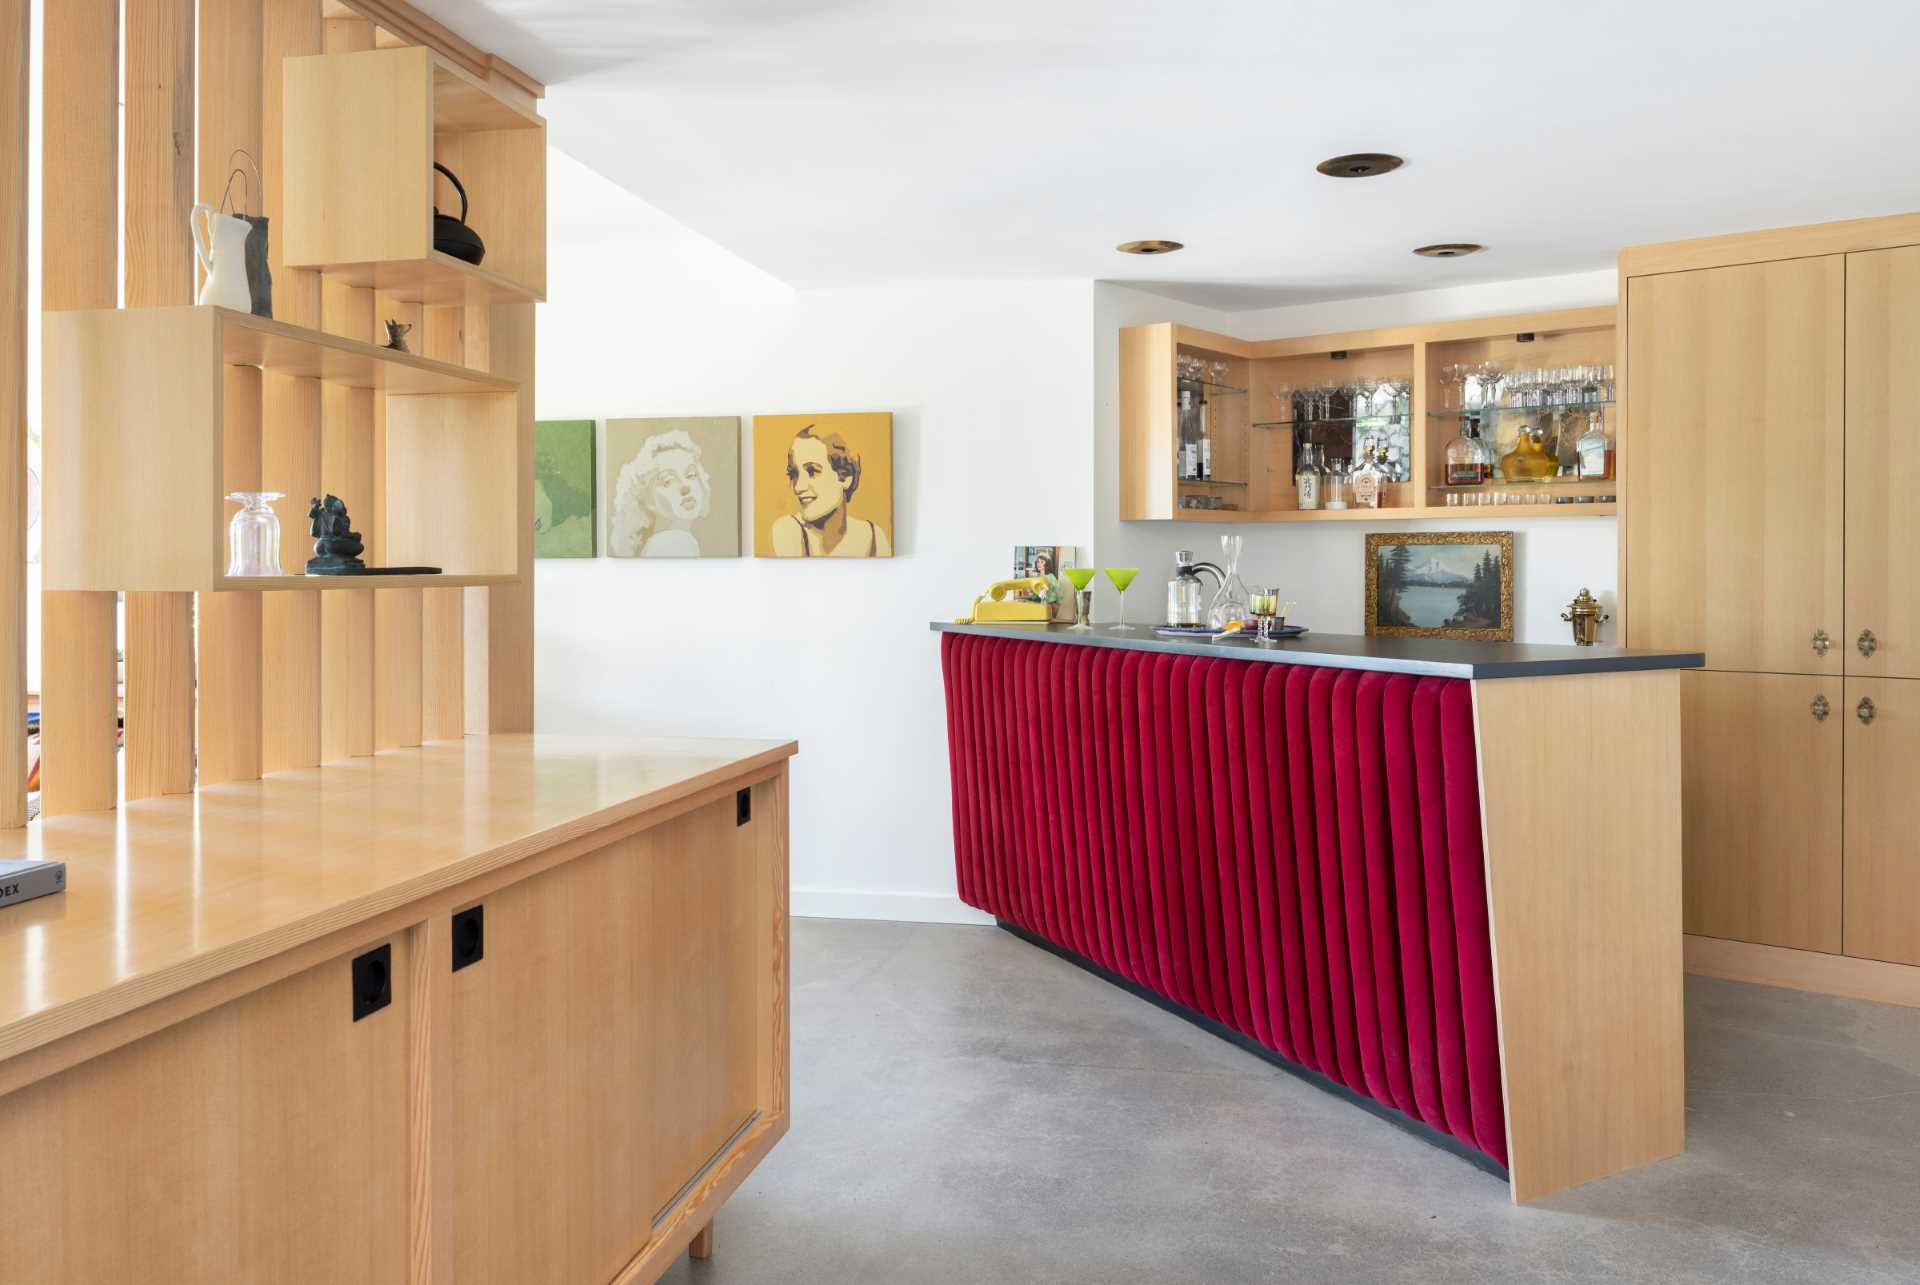 An original mid-century modern built-in bar received a fresh facade with a dramatic red velvet channel tuft upholstery, and new dark countertops.